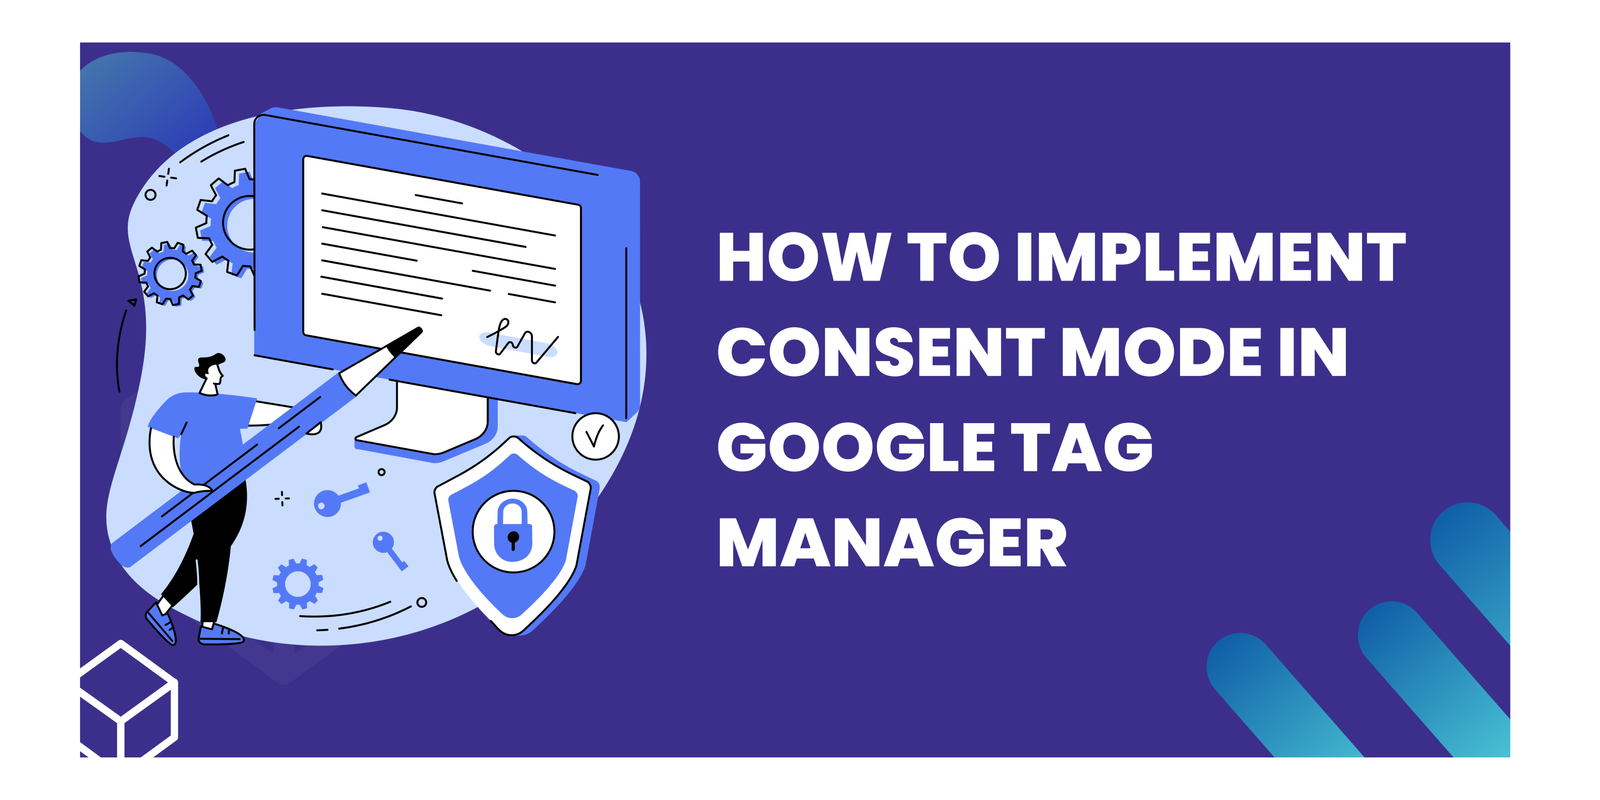 How to Implement Consent Mode in Google Tag Manager